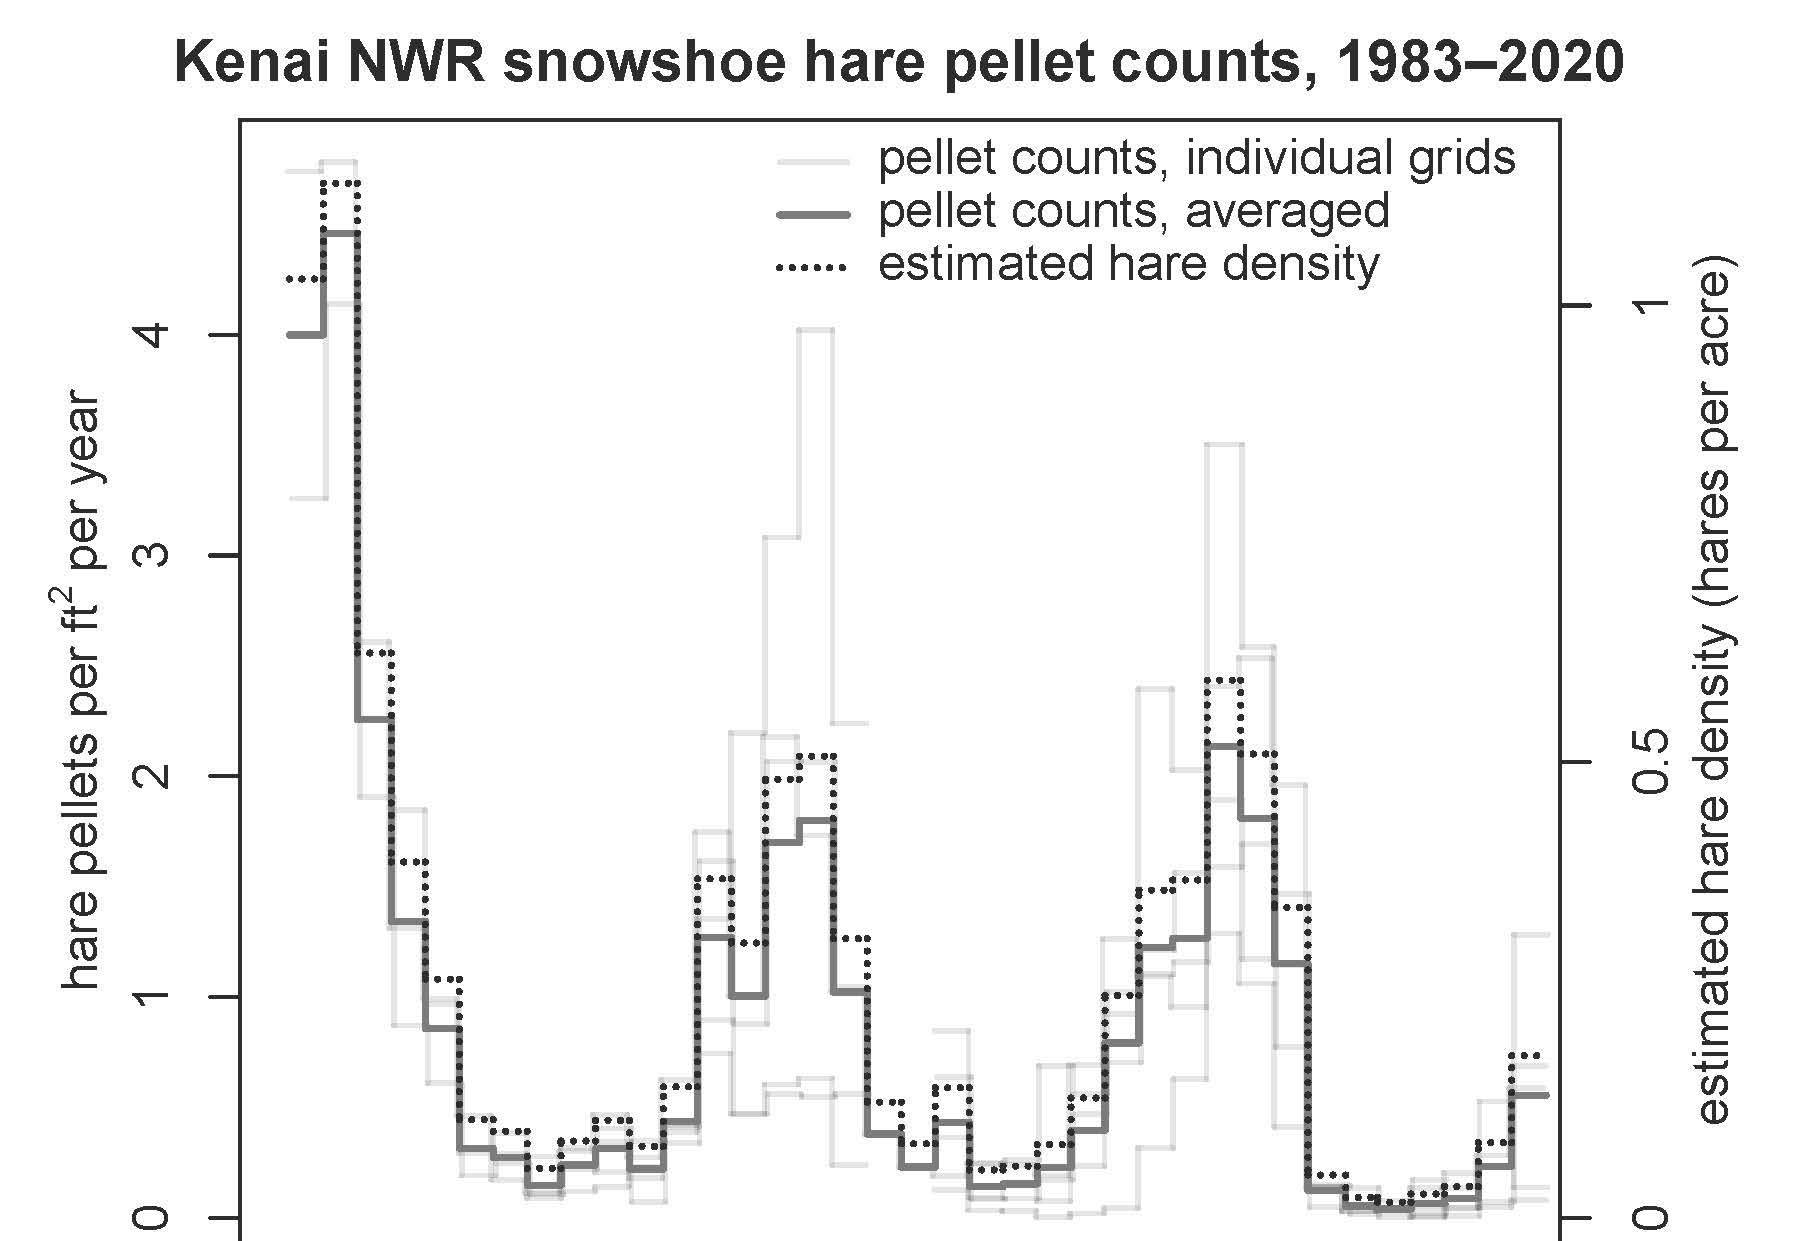 Refuge Notebook: Snowshoe hare population is on rise